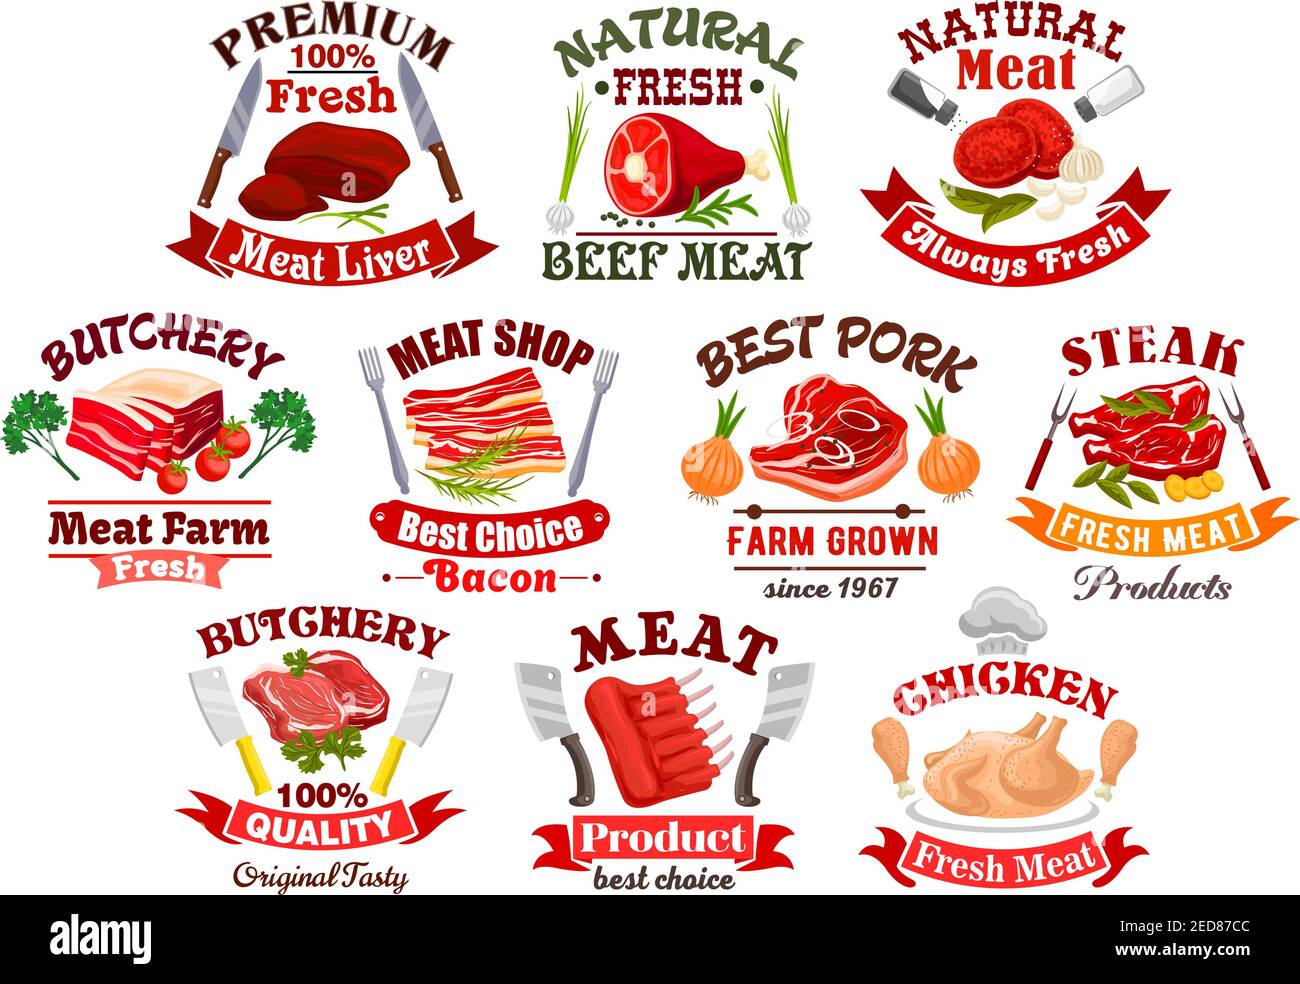 Icons of meat products like chicken on plate and beef steak, bacon with leaf and lamb or cow meat with onion and spices, forks and knives, solnice and Stock Vector